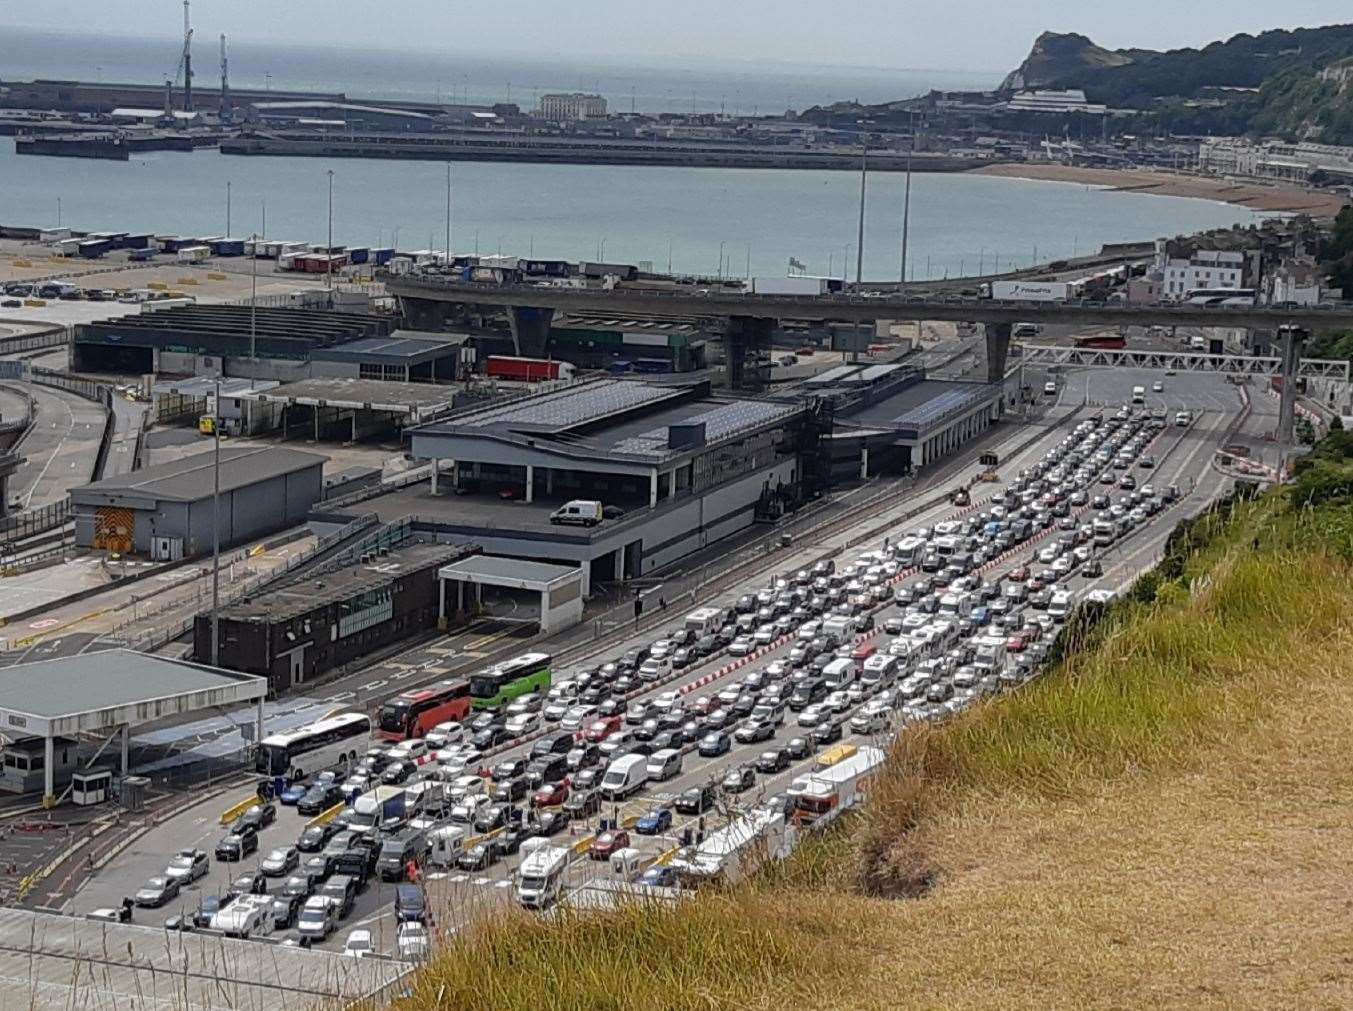 There are fears the country could face the outbreak of disease if checks at the Port of Dover on incoming goods are not implemented